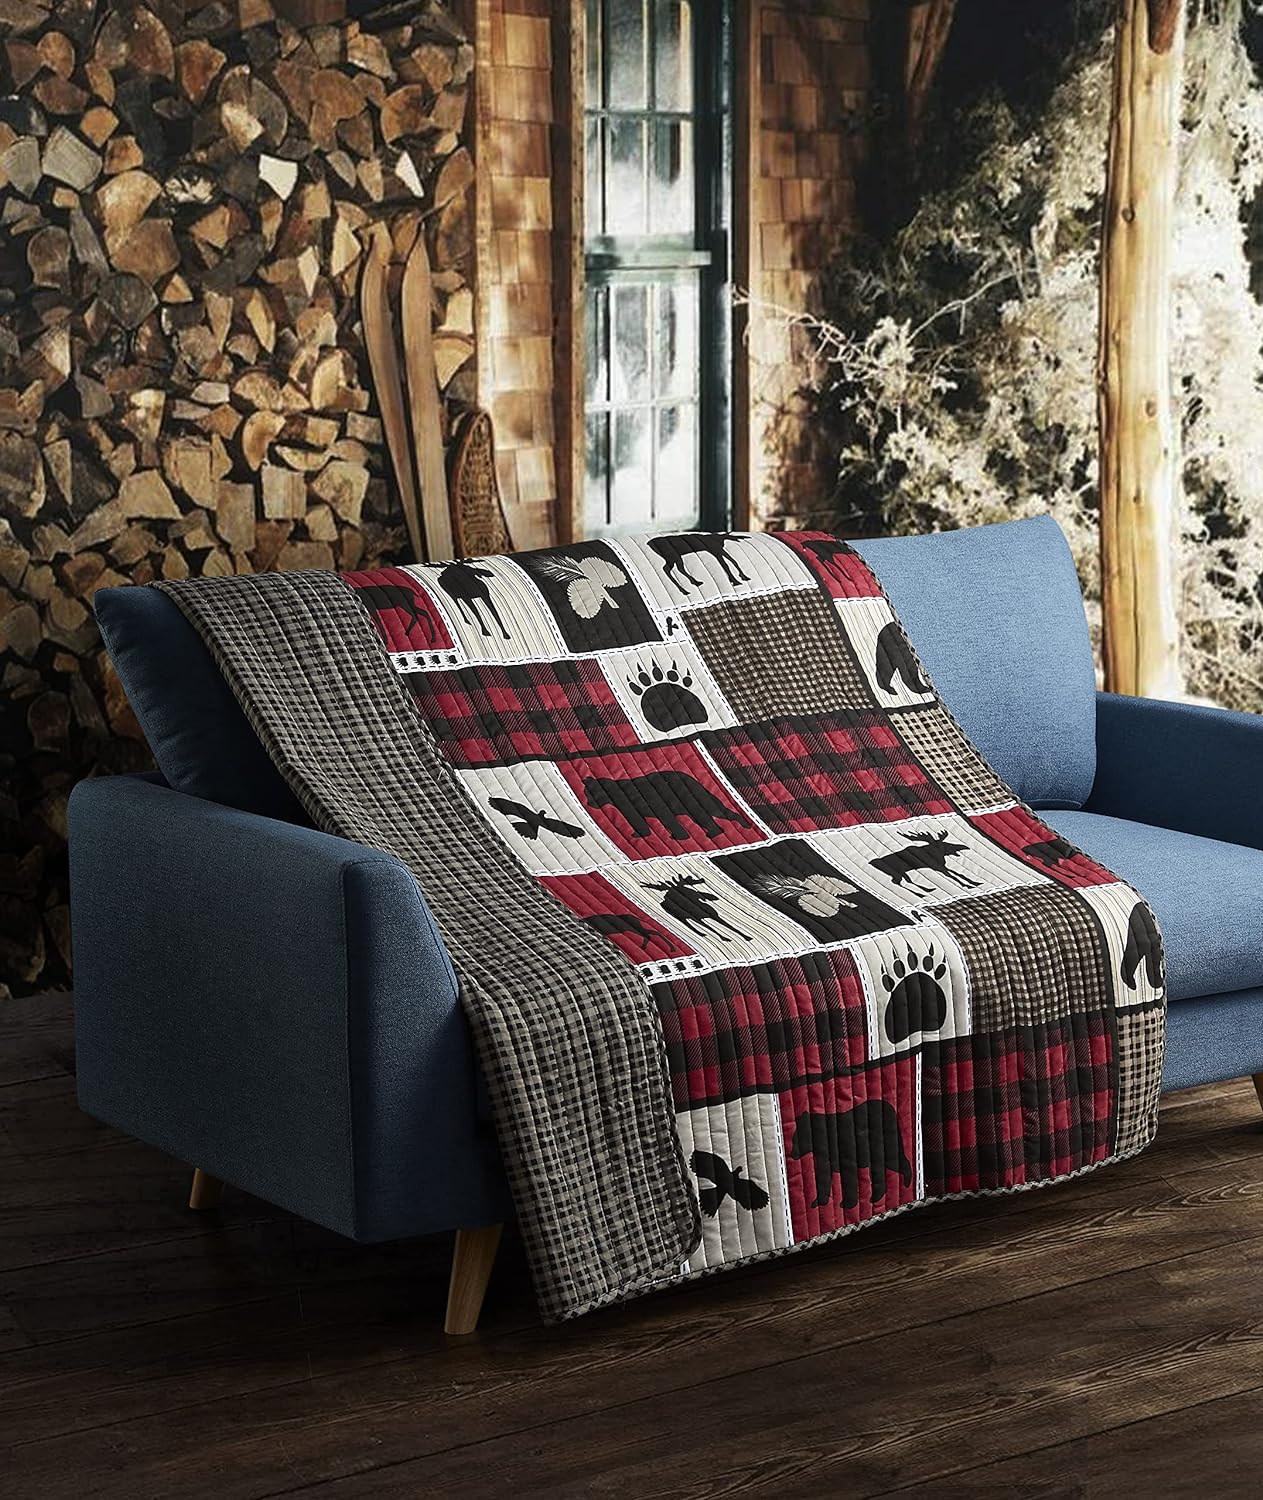 Virah Bella Quilted Country Plaid Throw Blanket for Couch - 50" x 60" - Lightweight Lodge Life Throw Quilt